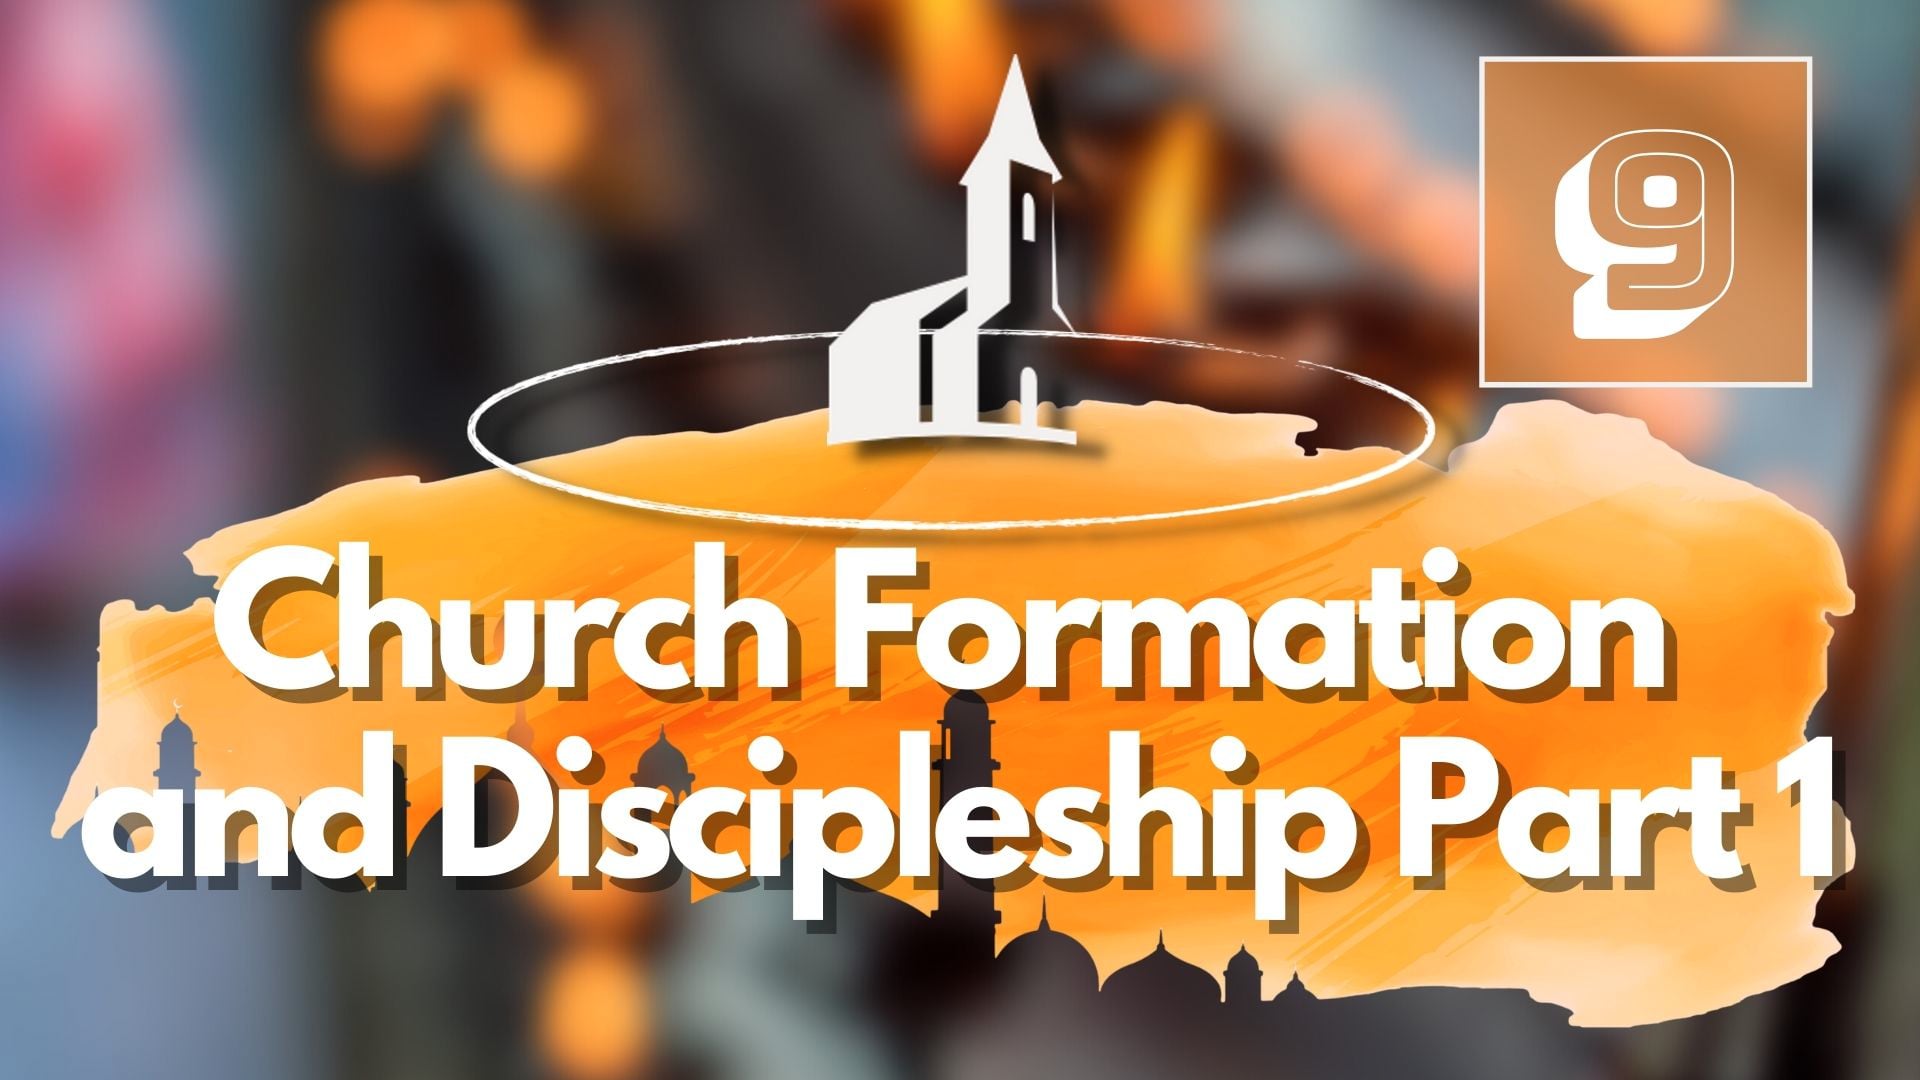 9. Church Formation and Discipleship Part 1 – Mike Shipman